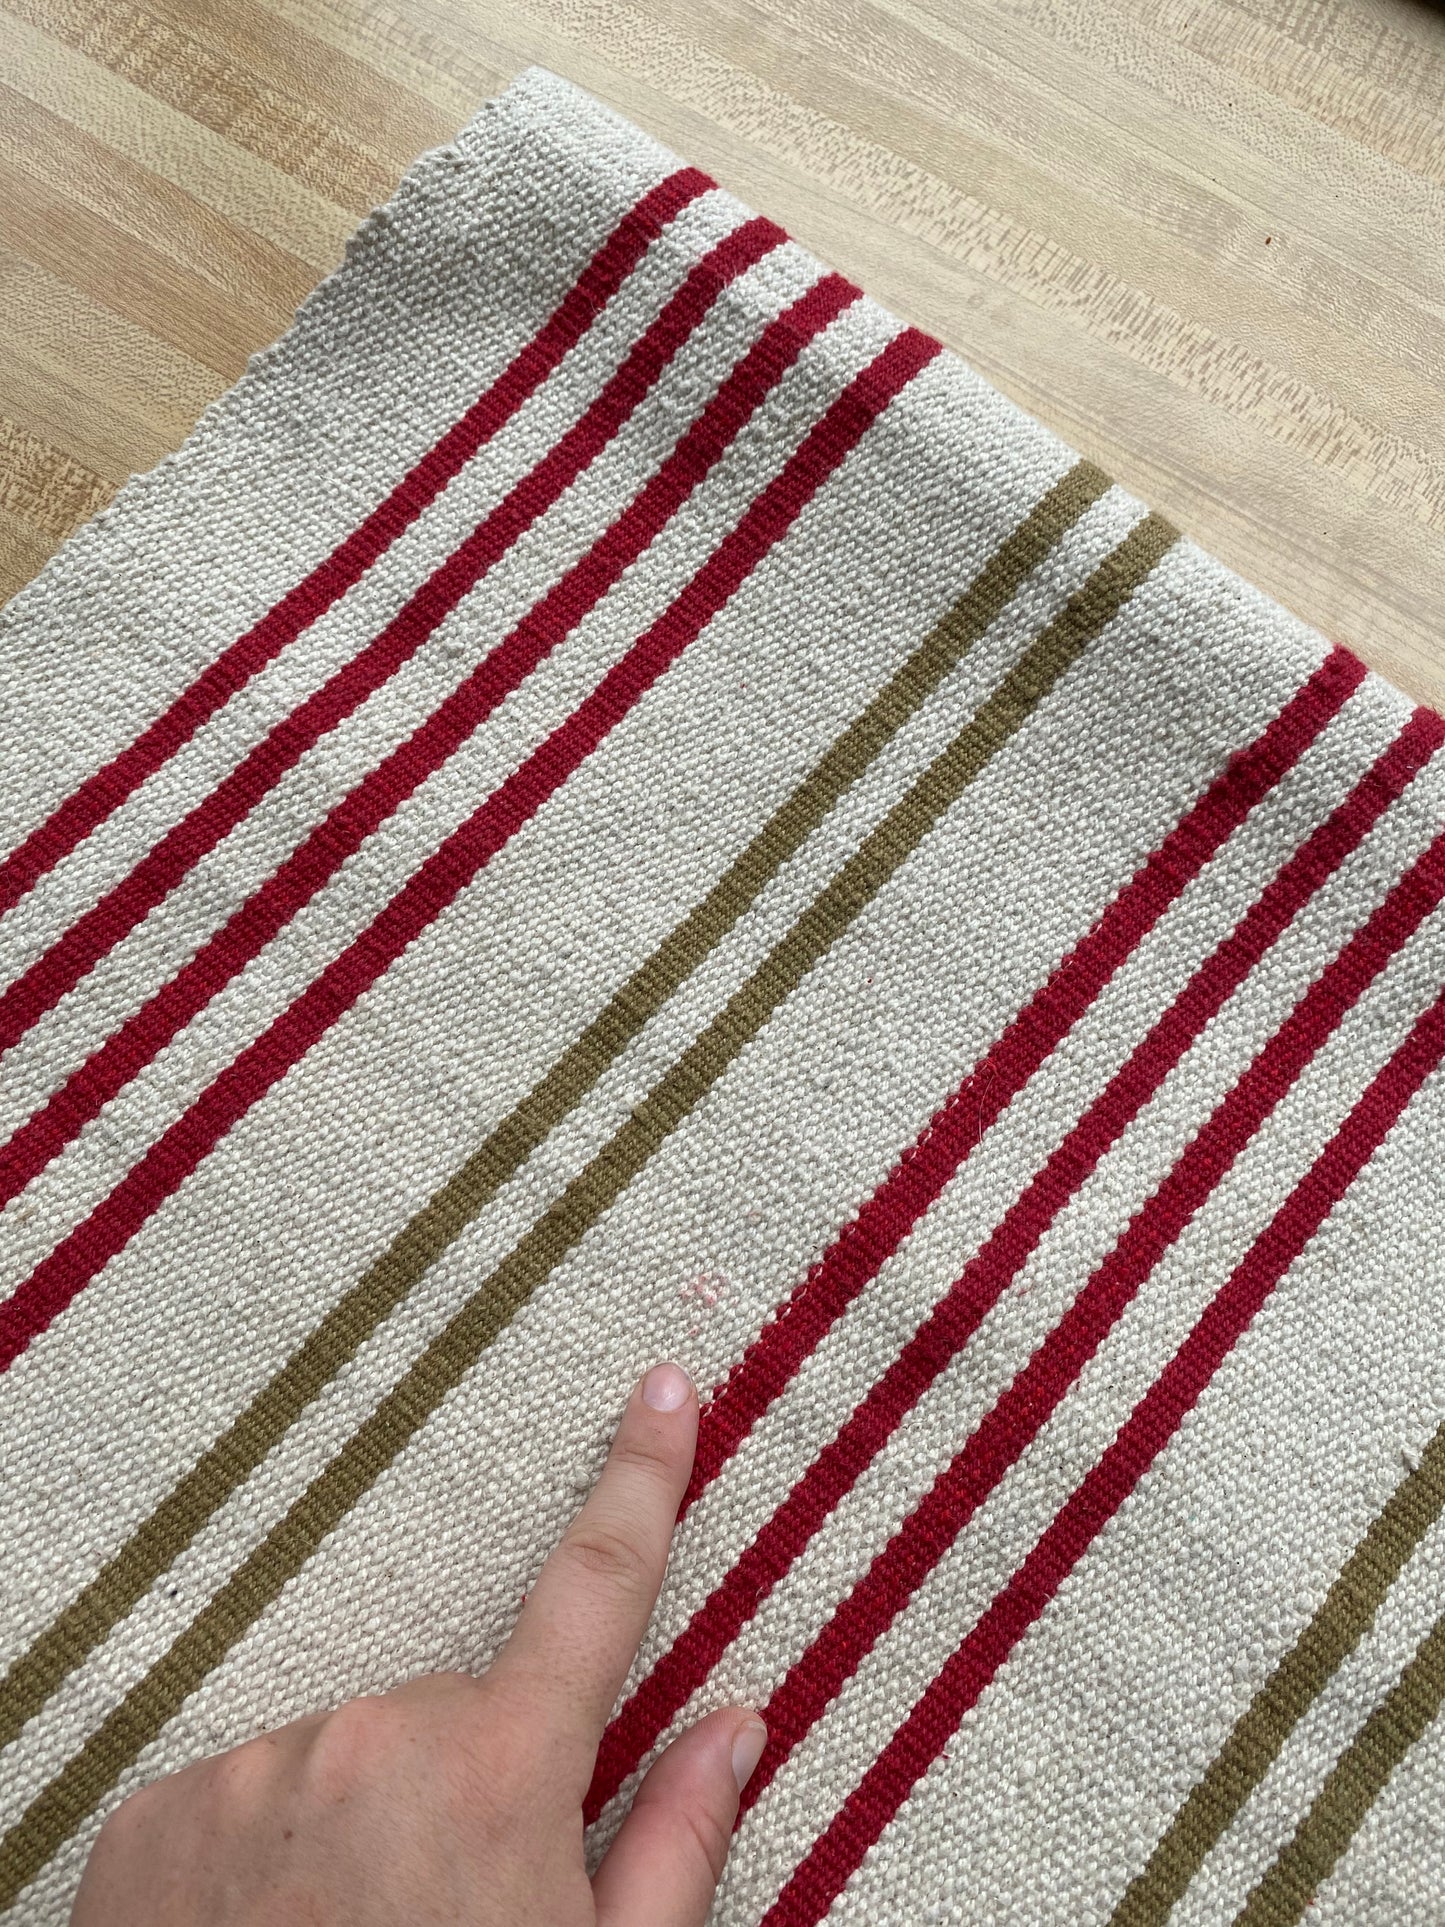 Small Striped Rug with Fringe ~ 35x22"